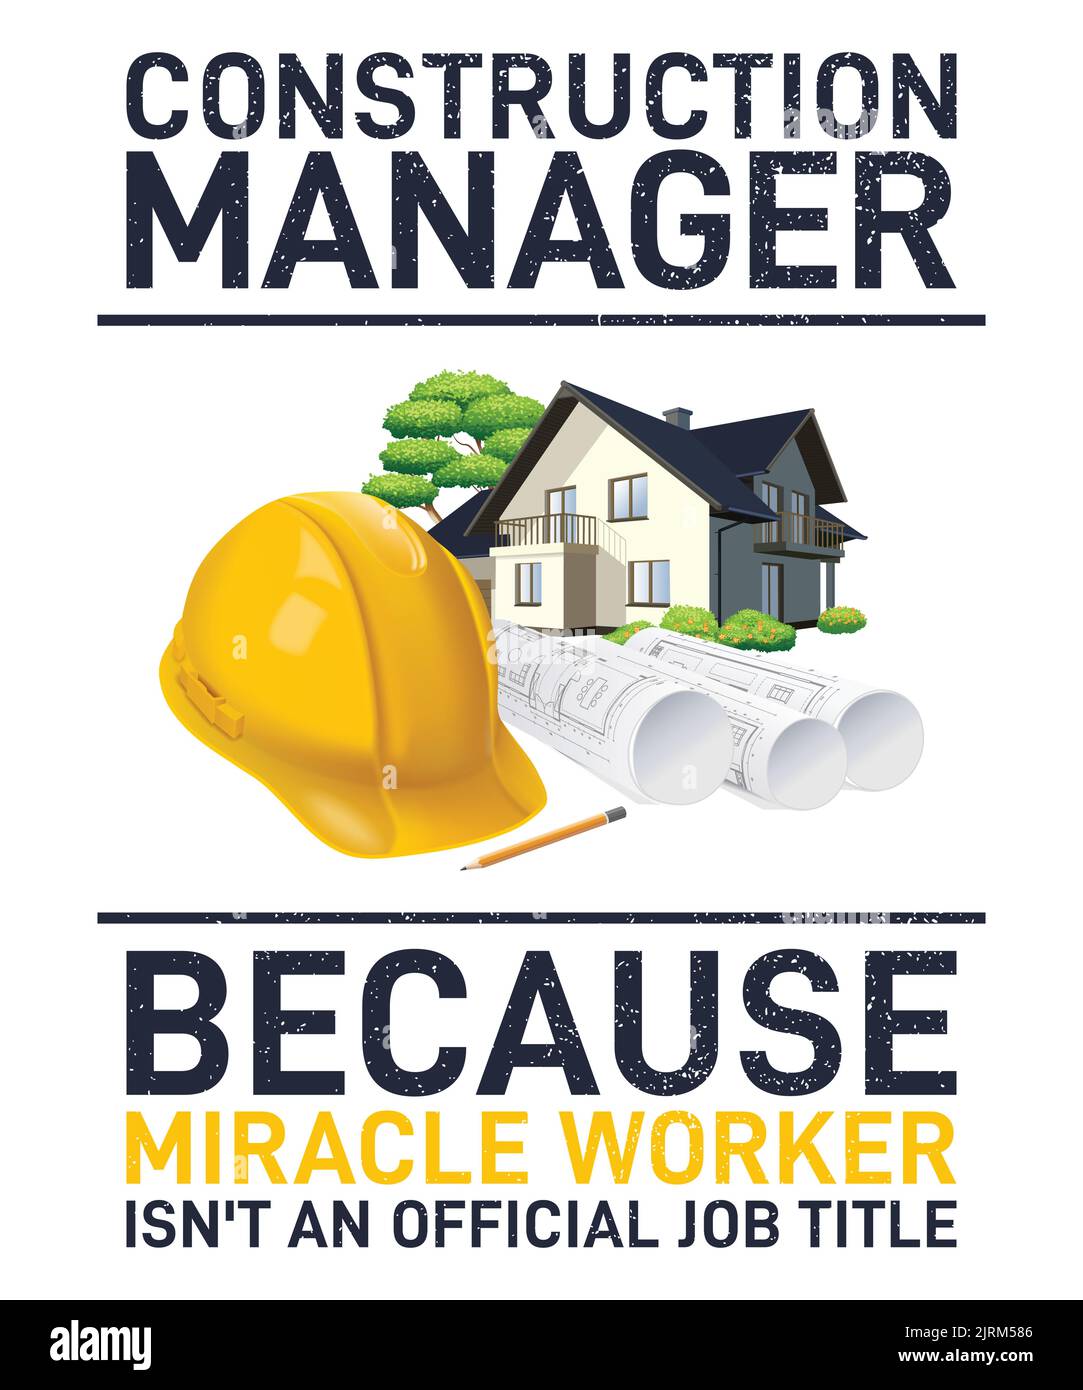 Construction manager, because miracle worker isn't an official job title - print for t-shirt, poster, sticker. Stock Vector